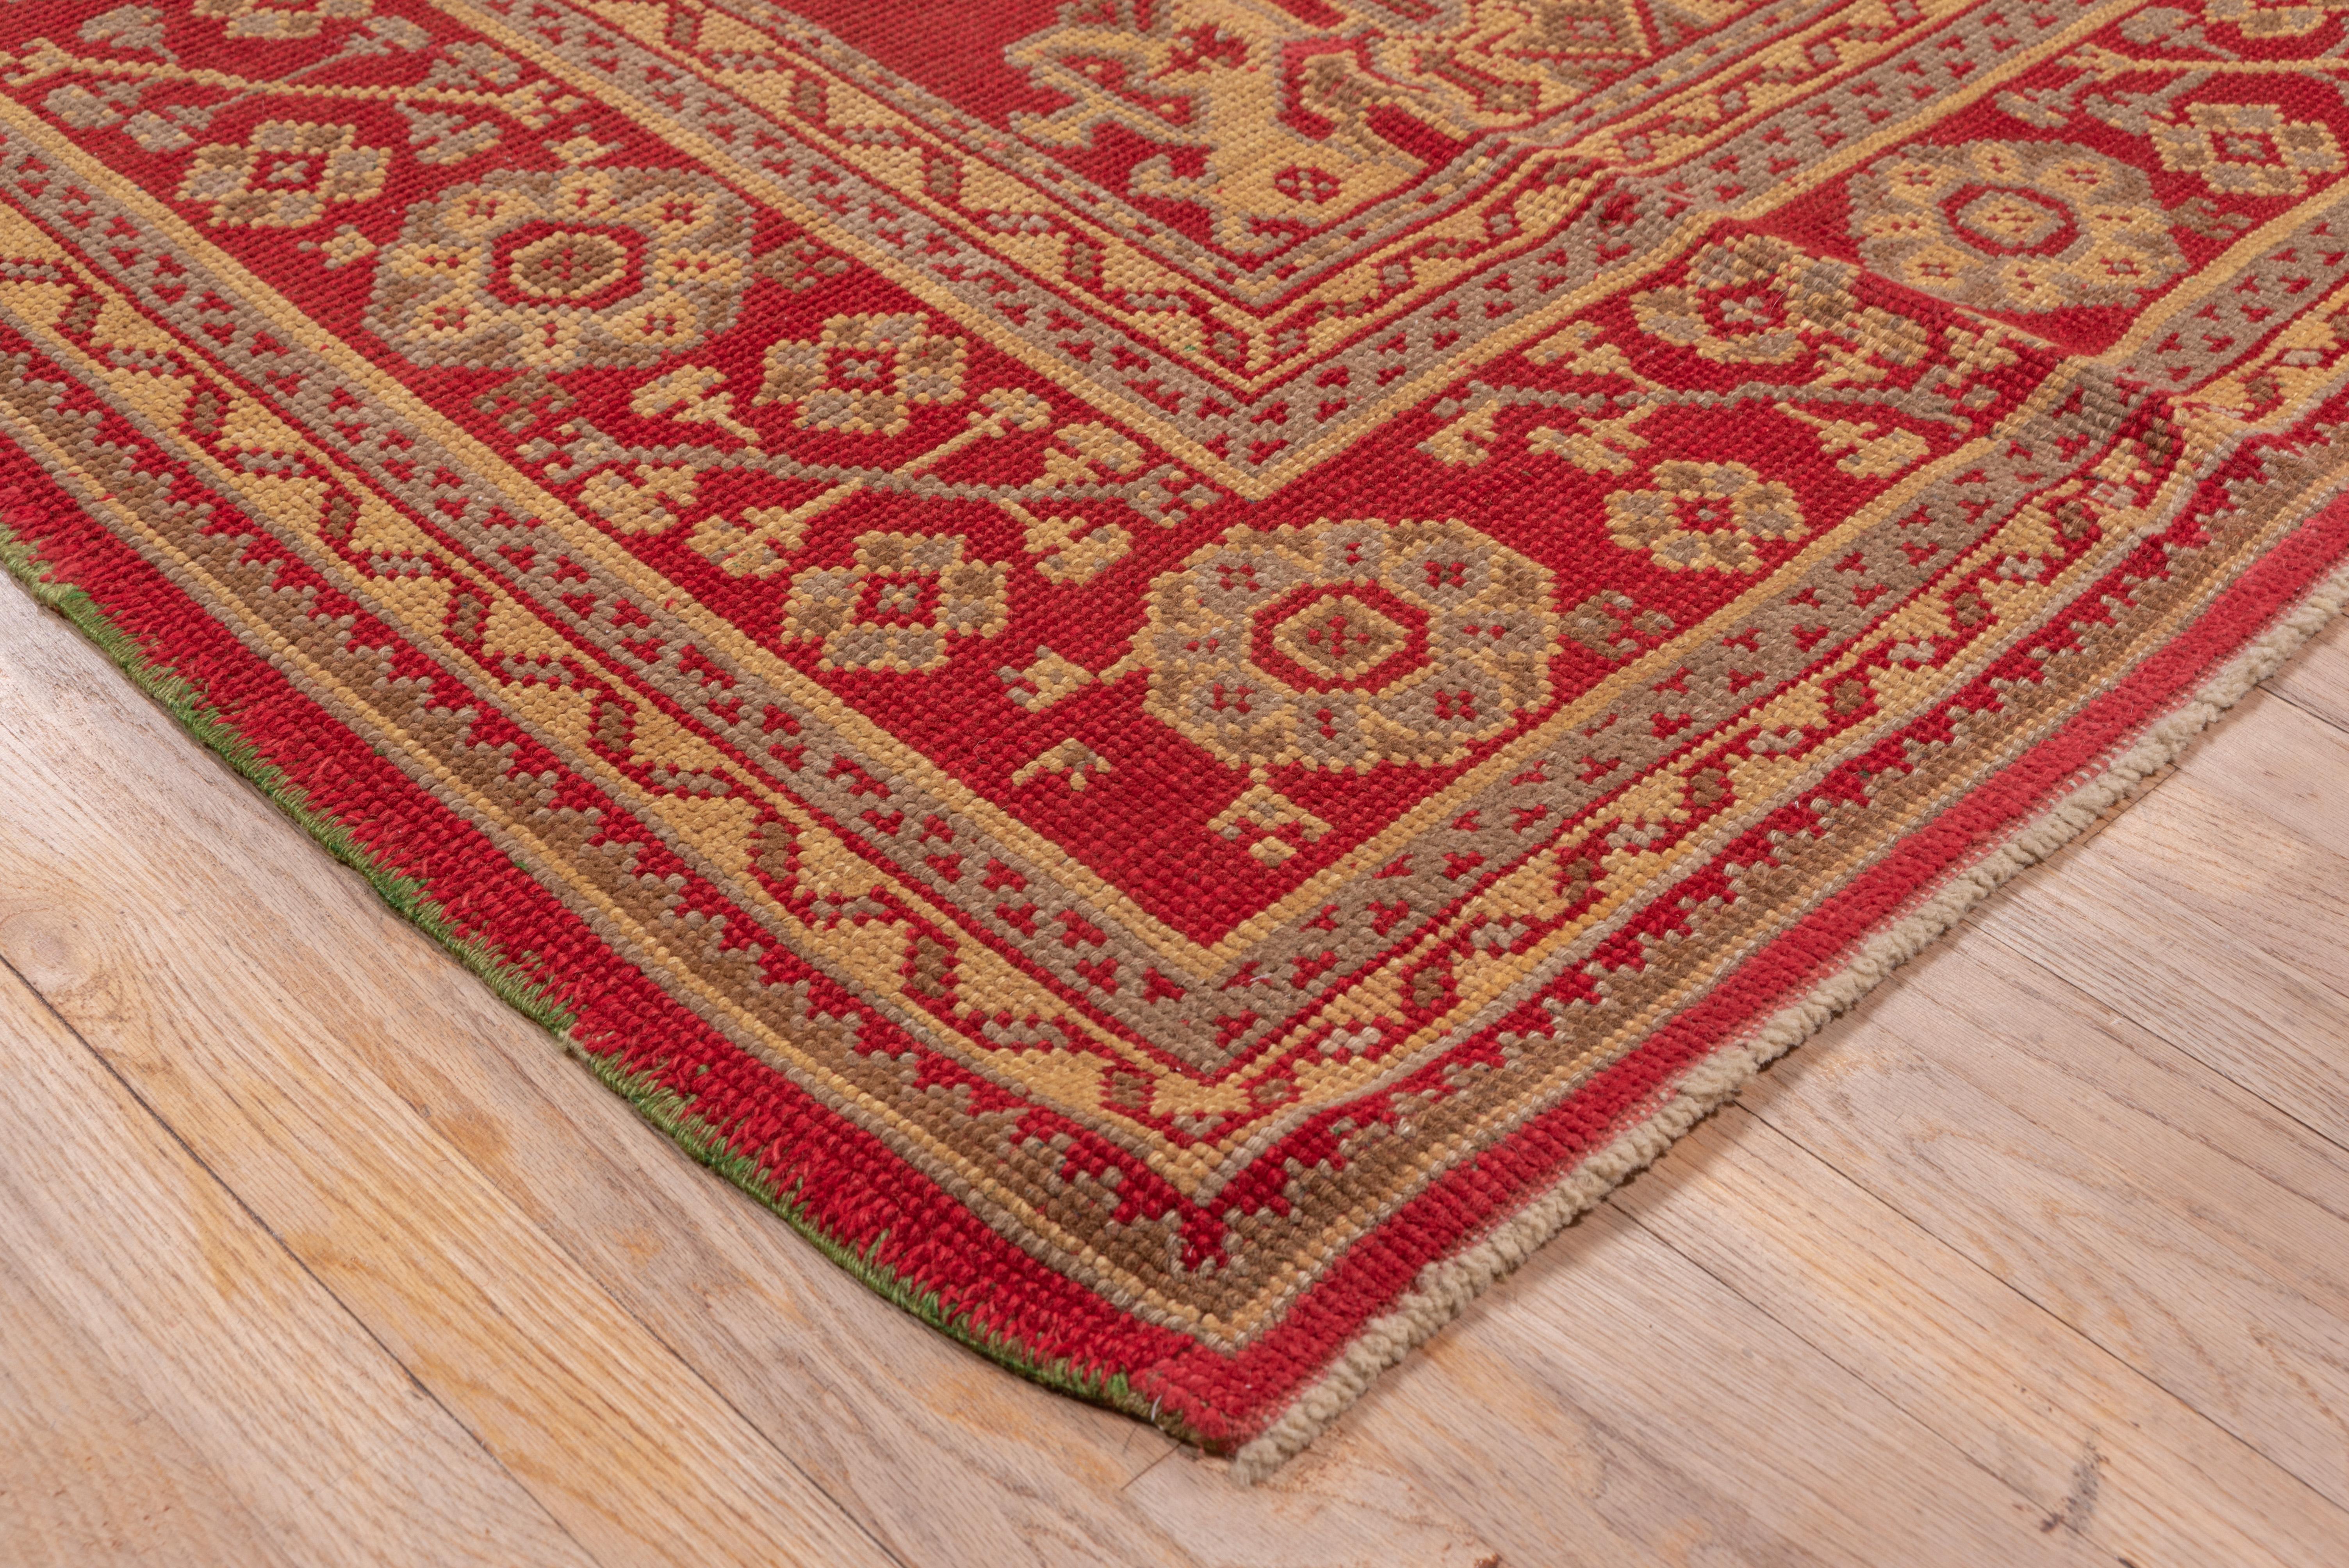 The Turkey red field of this Smyrna-style carpet displays three alternating columns of ragged palmettes and diamond-shaped Yaprak (leaf) medallions accented with botehs. The matching red border shows rosettes and hyacinth sprays in the Ottoman